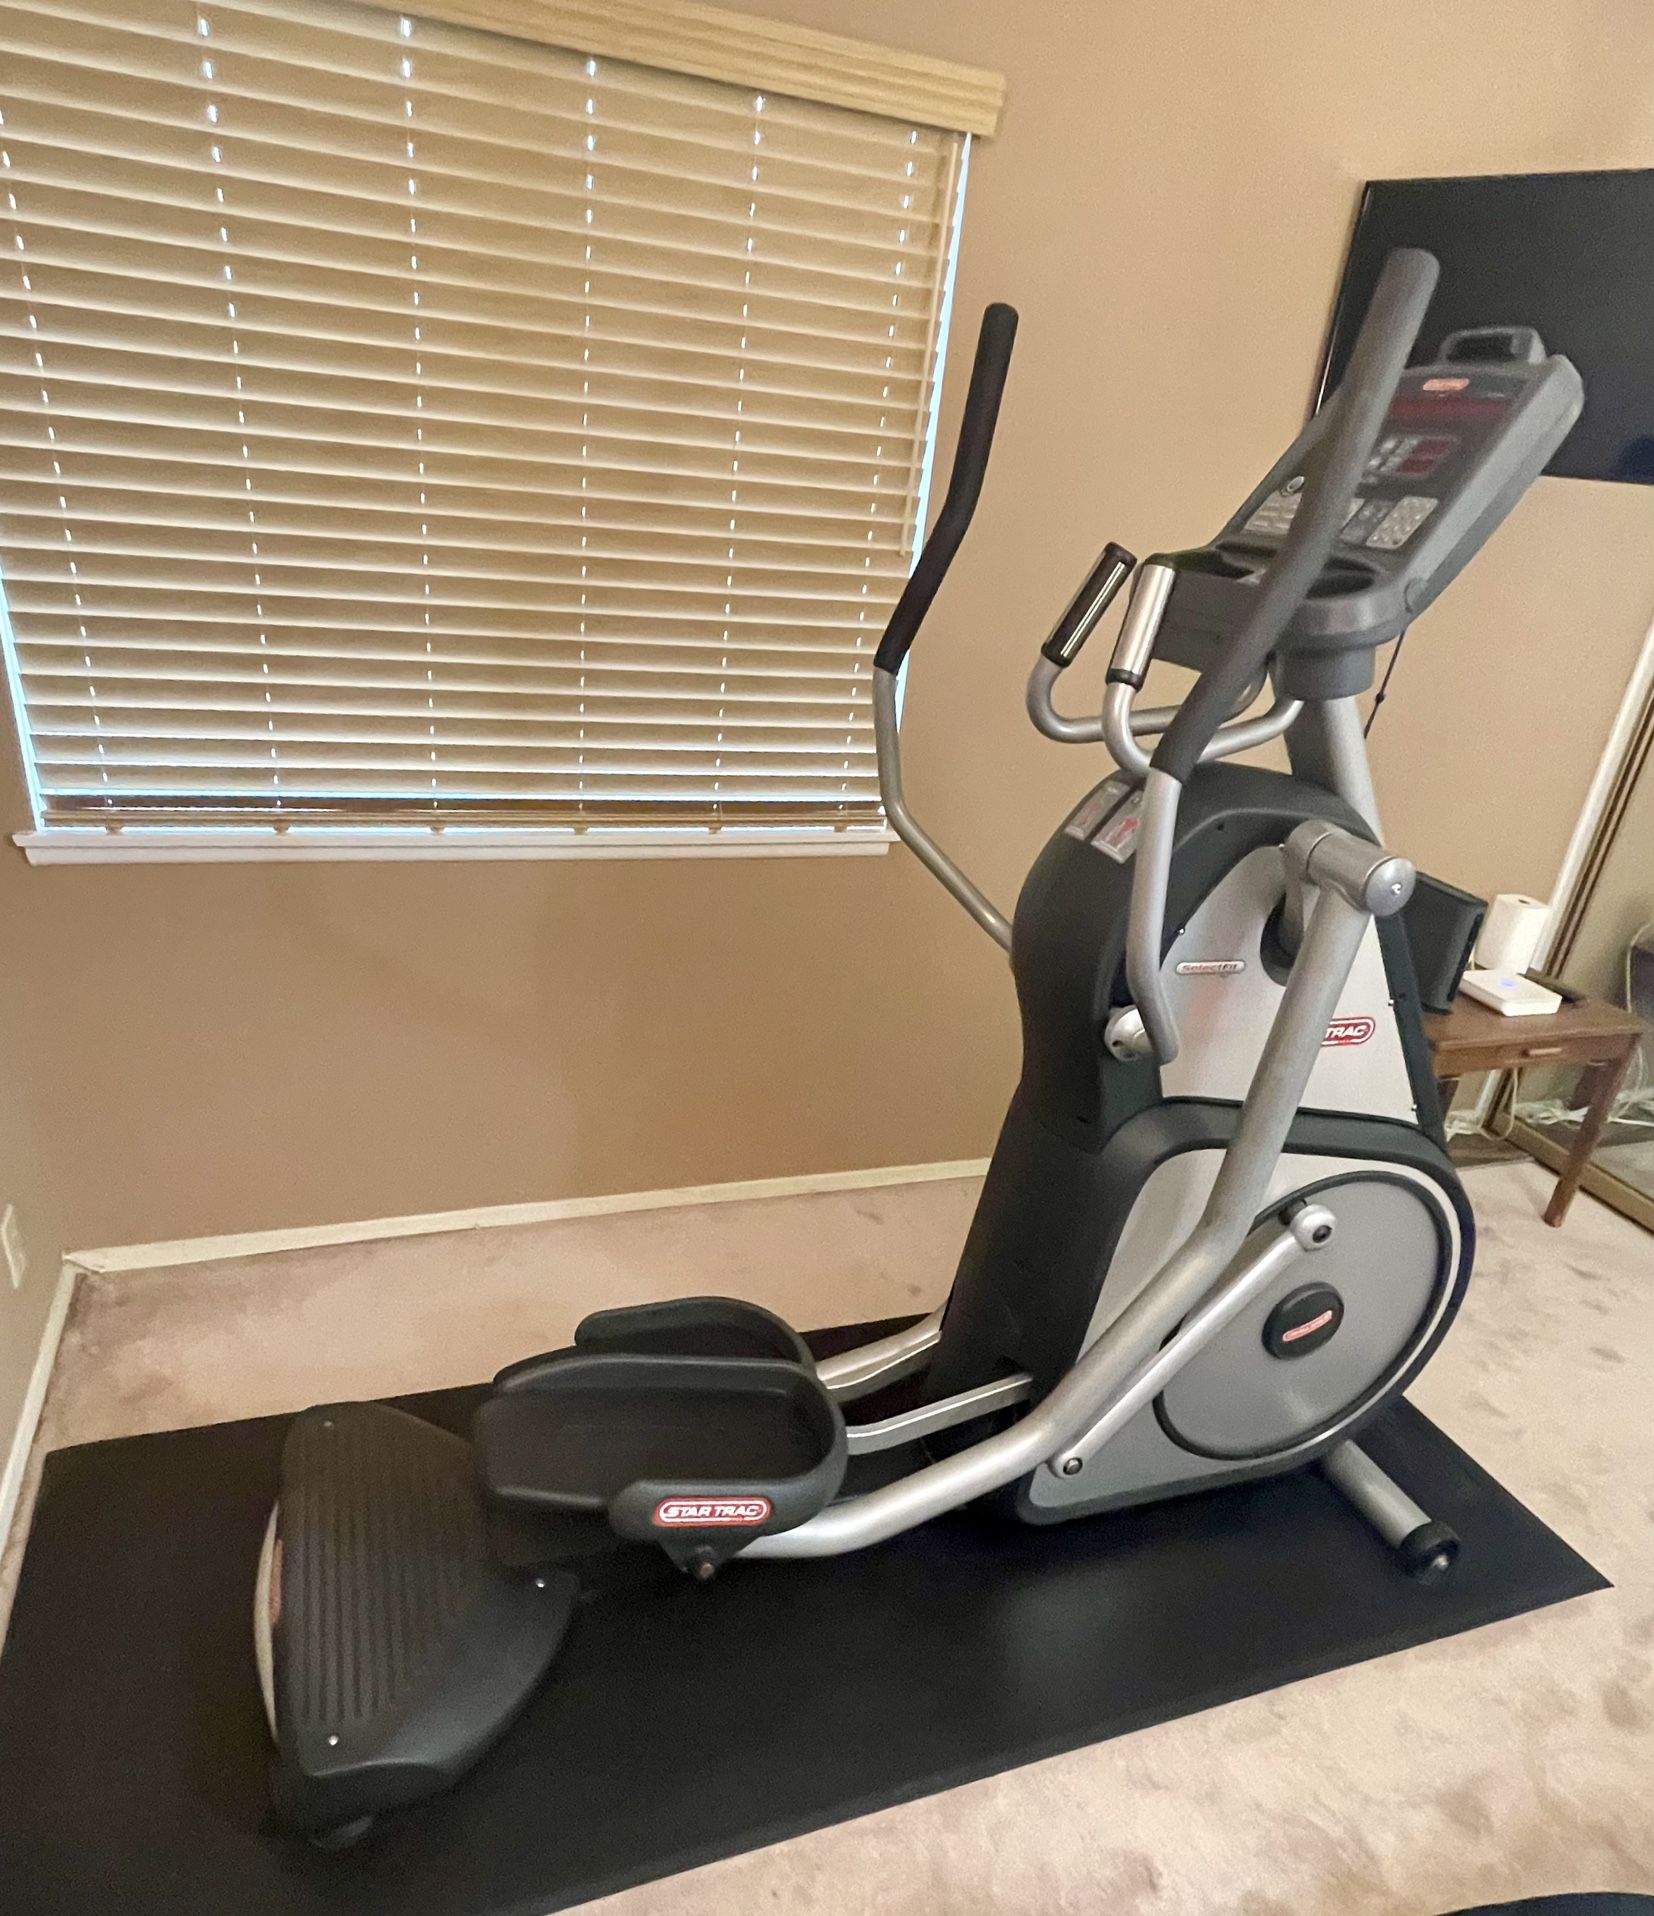 ⭐️ STAR TRAC Elite 6230 Pro Elliptical - Commercial Grade Machine with SelectFit Technology ⭐️